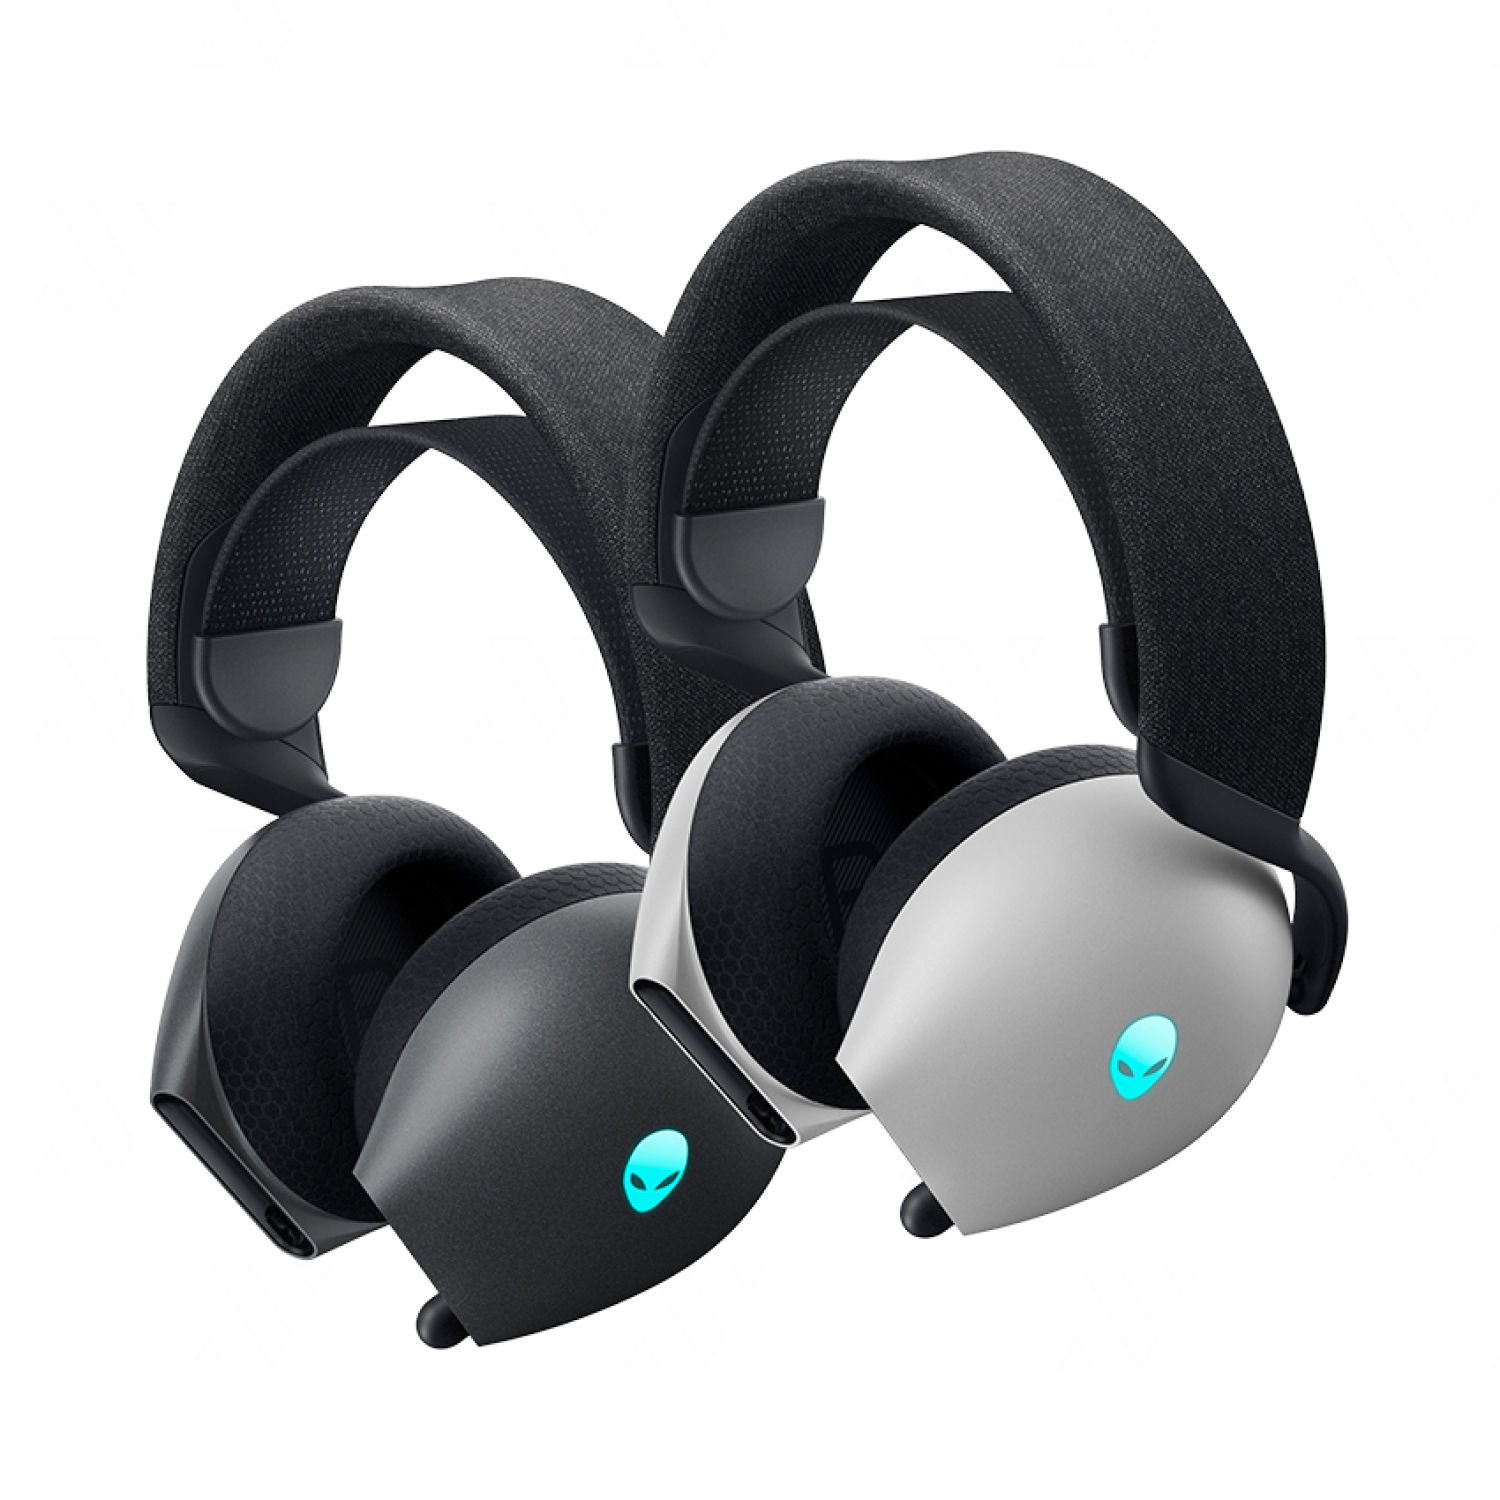 Alienware AW720H Wireless Gaming Headset | Dual-Mode | Black & White